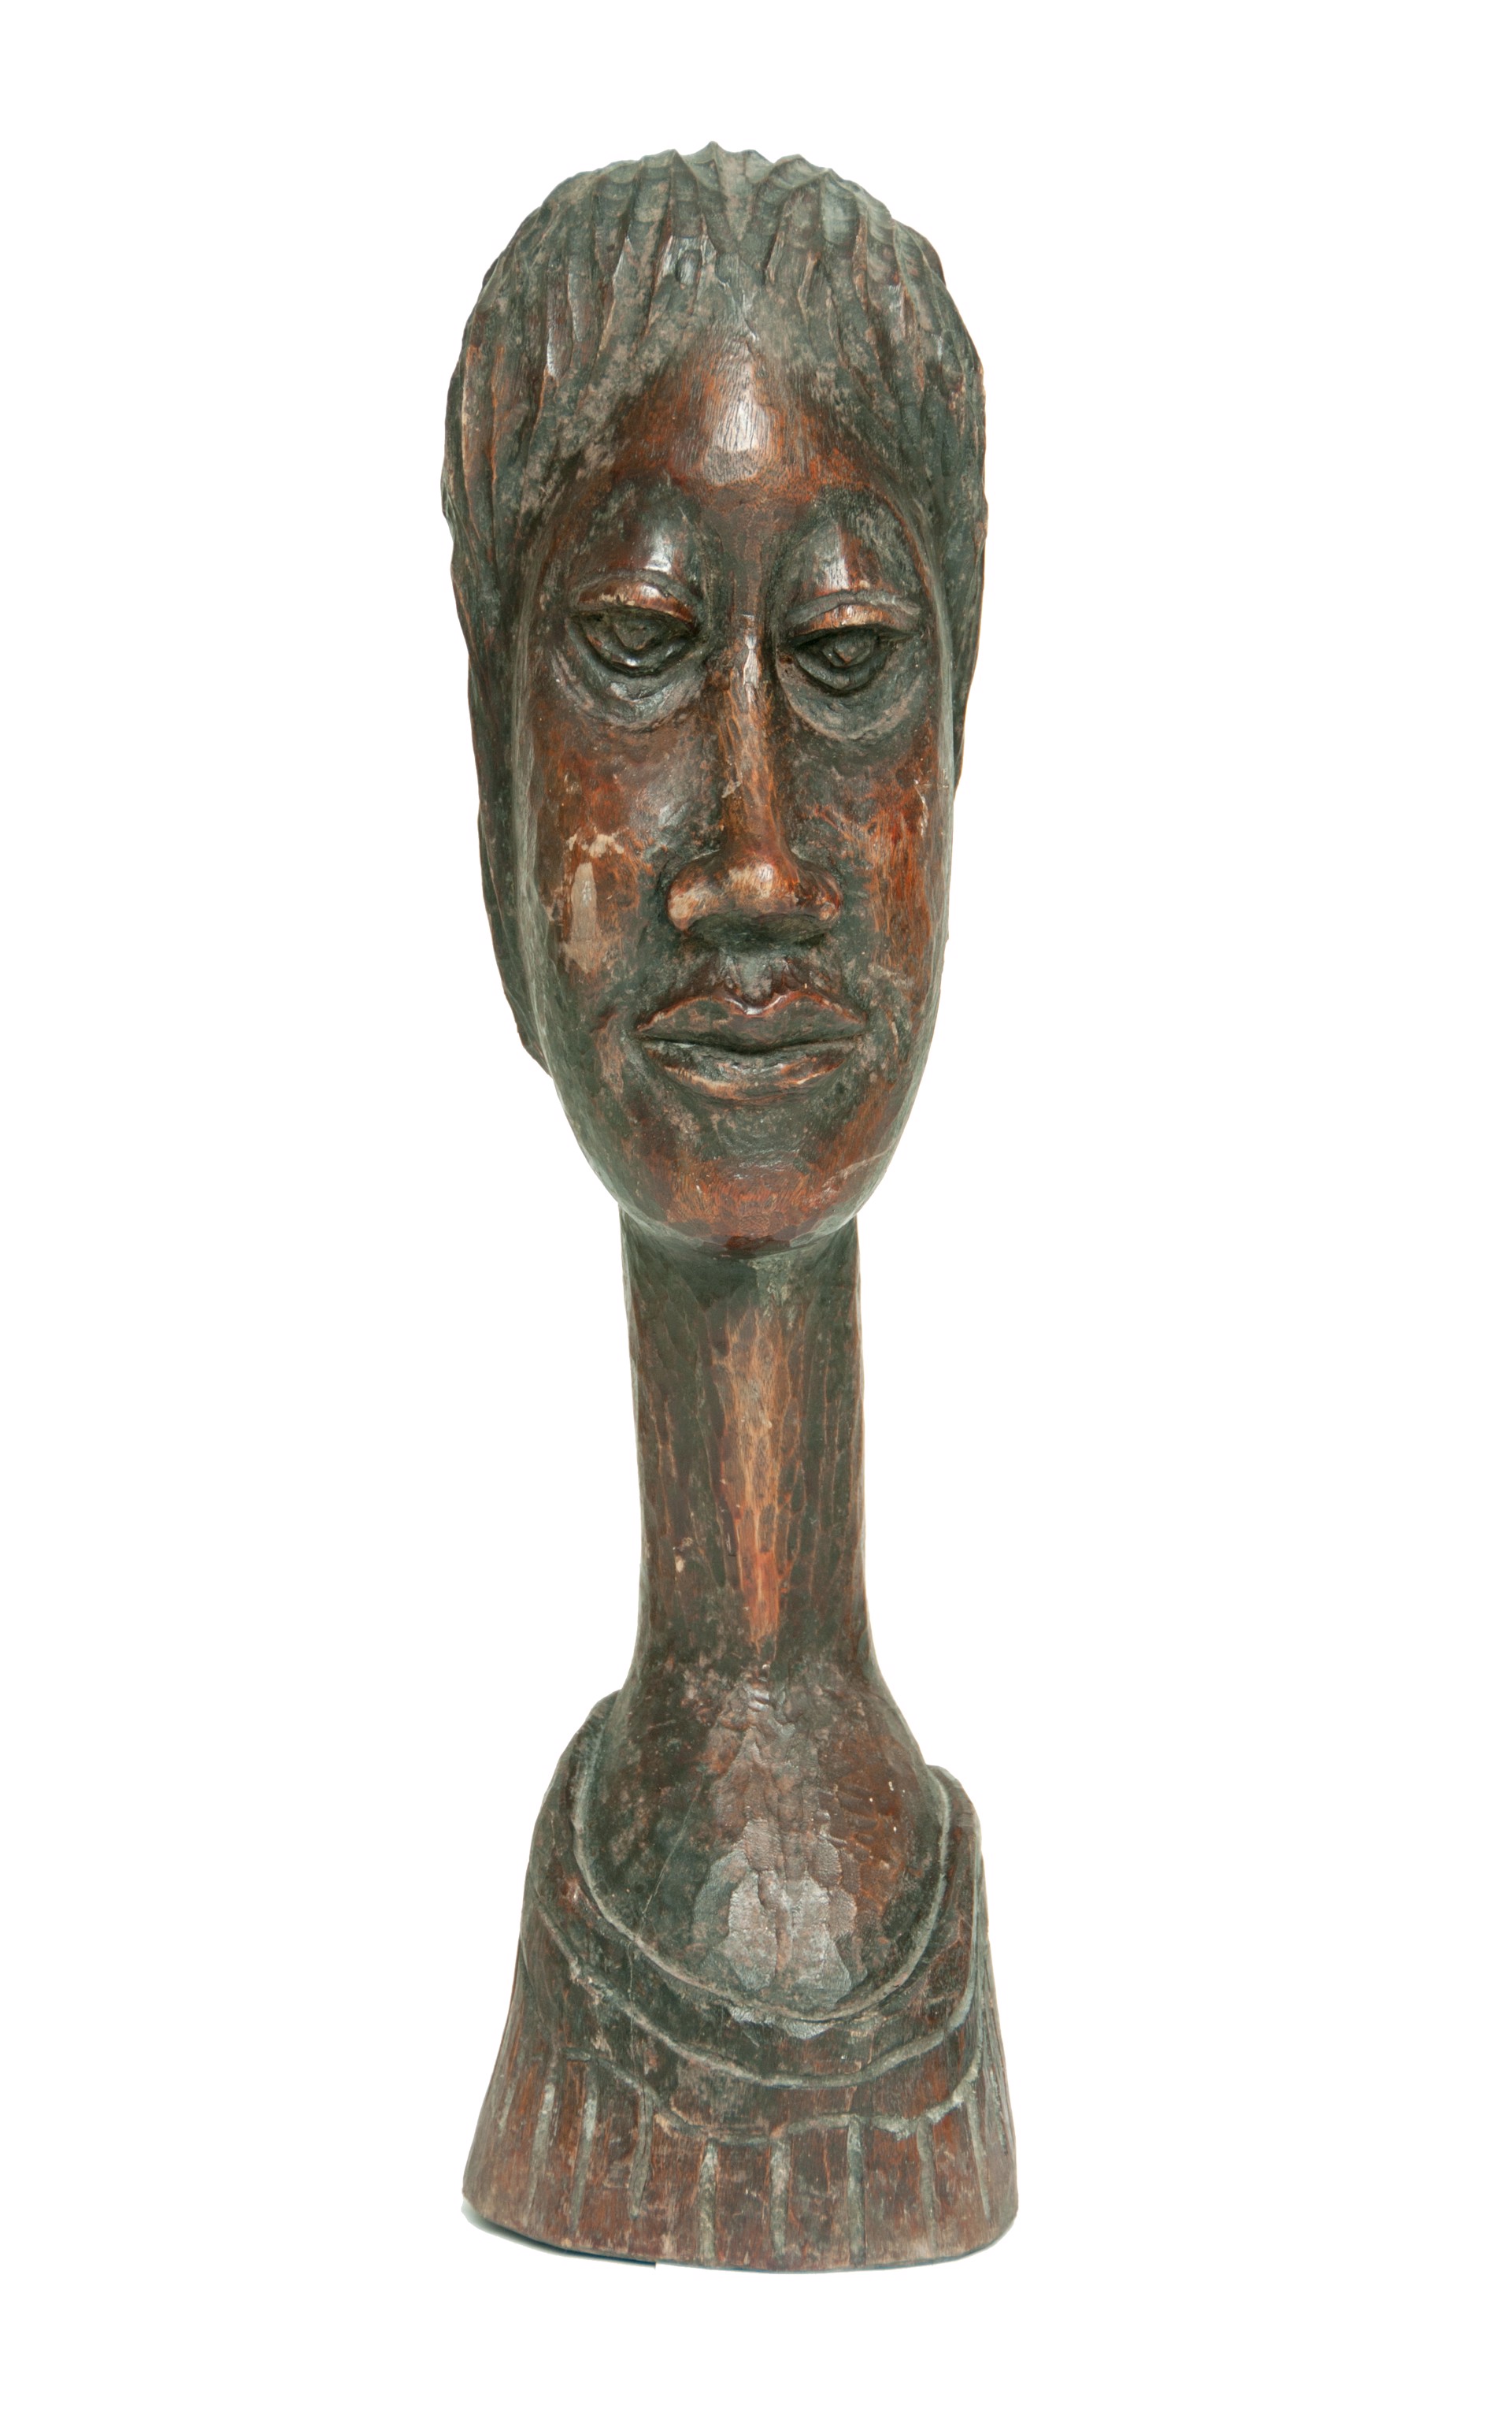 Old Woman's Bust #8-3-11GSN by Georges Laratte (Haitian, b.1933)